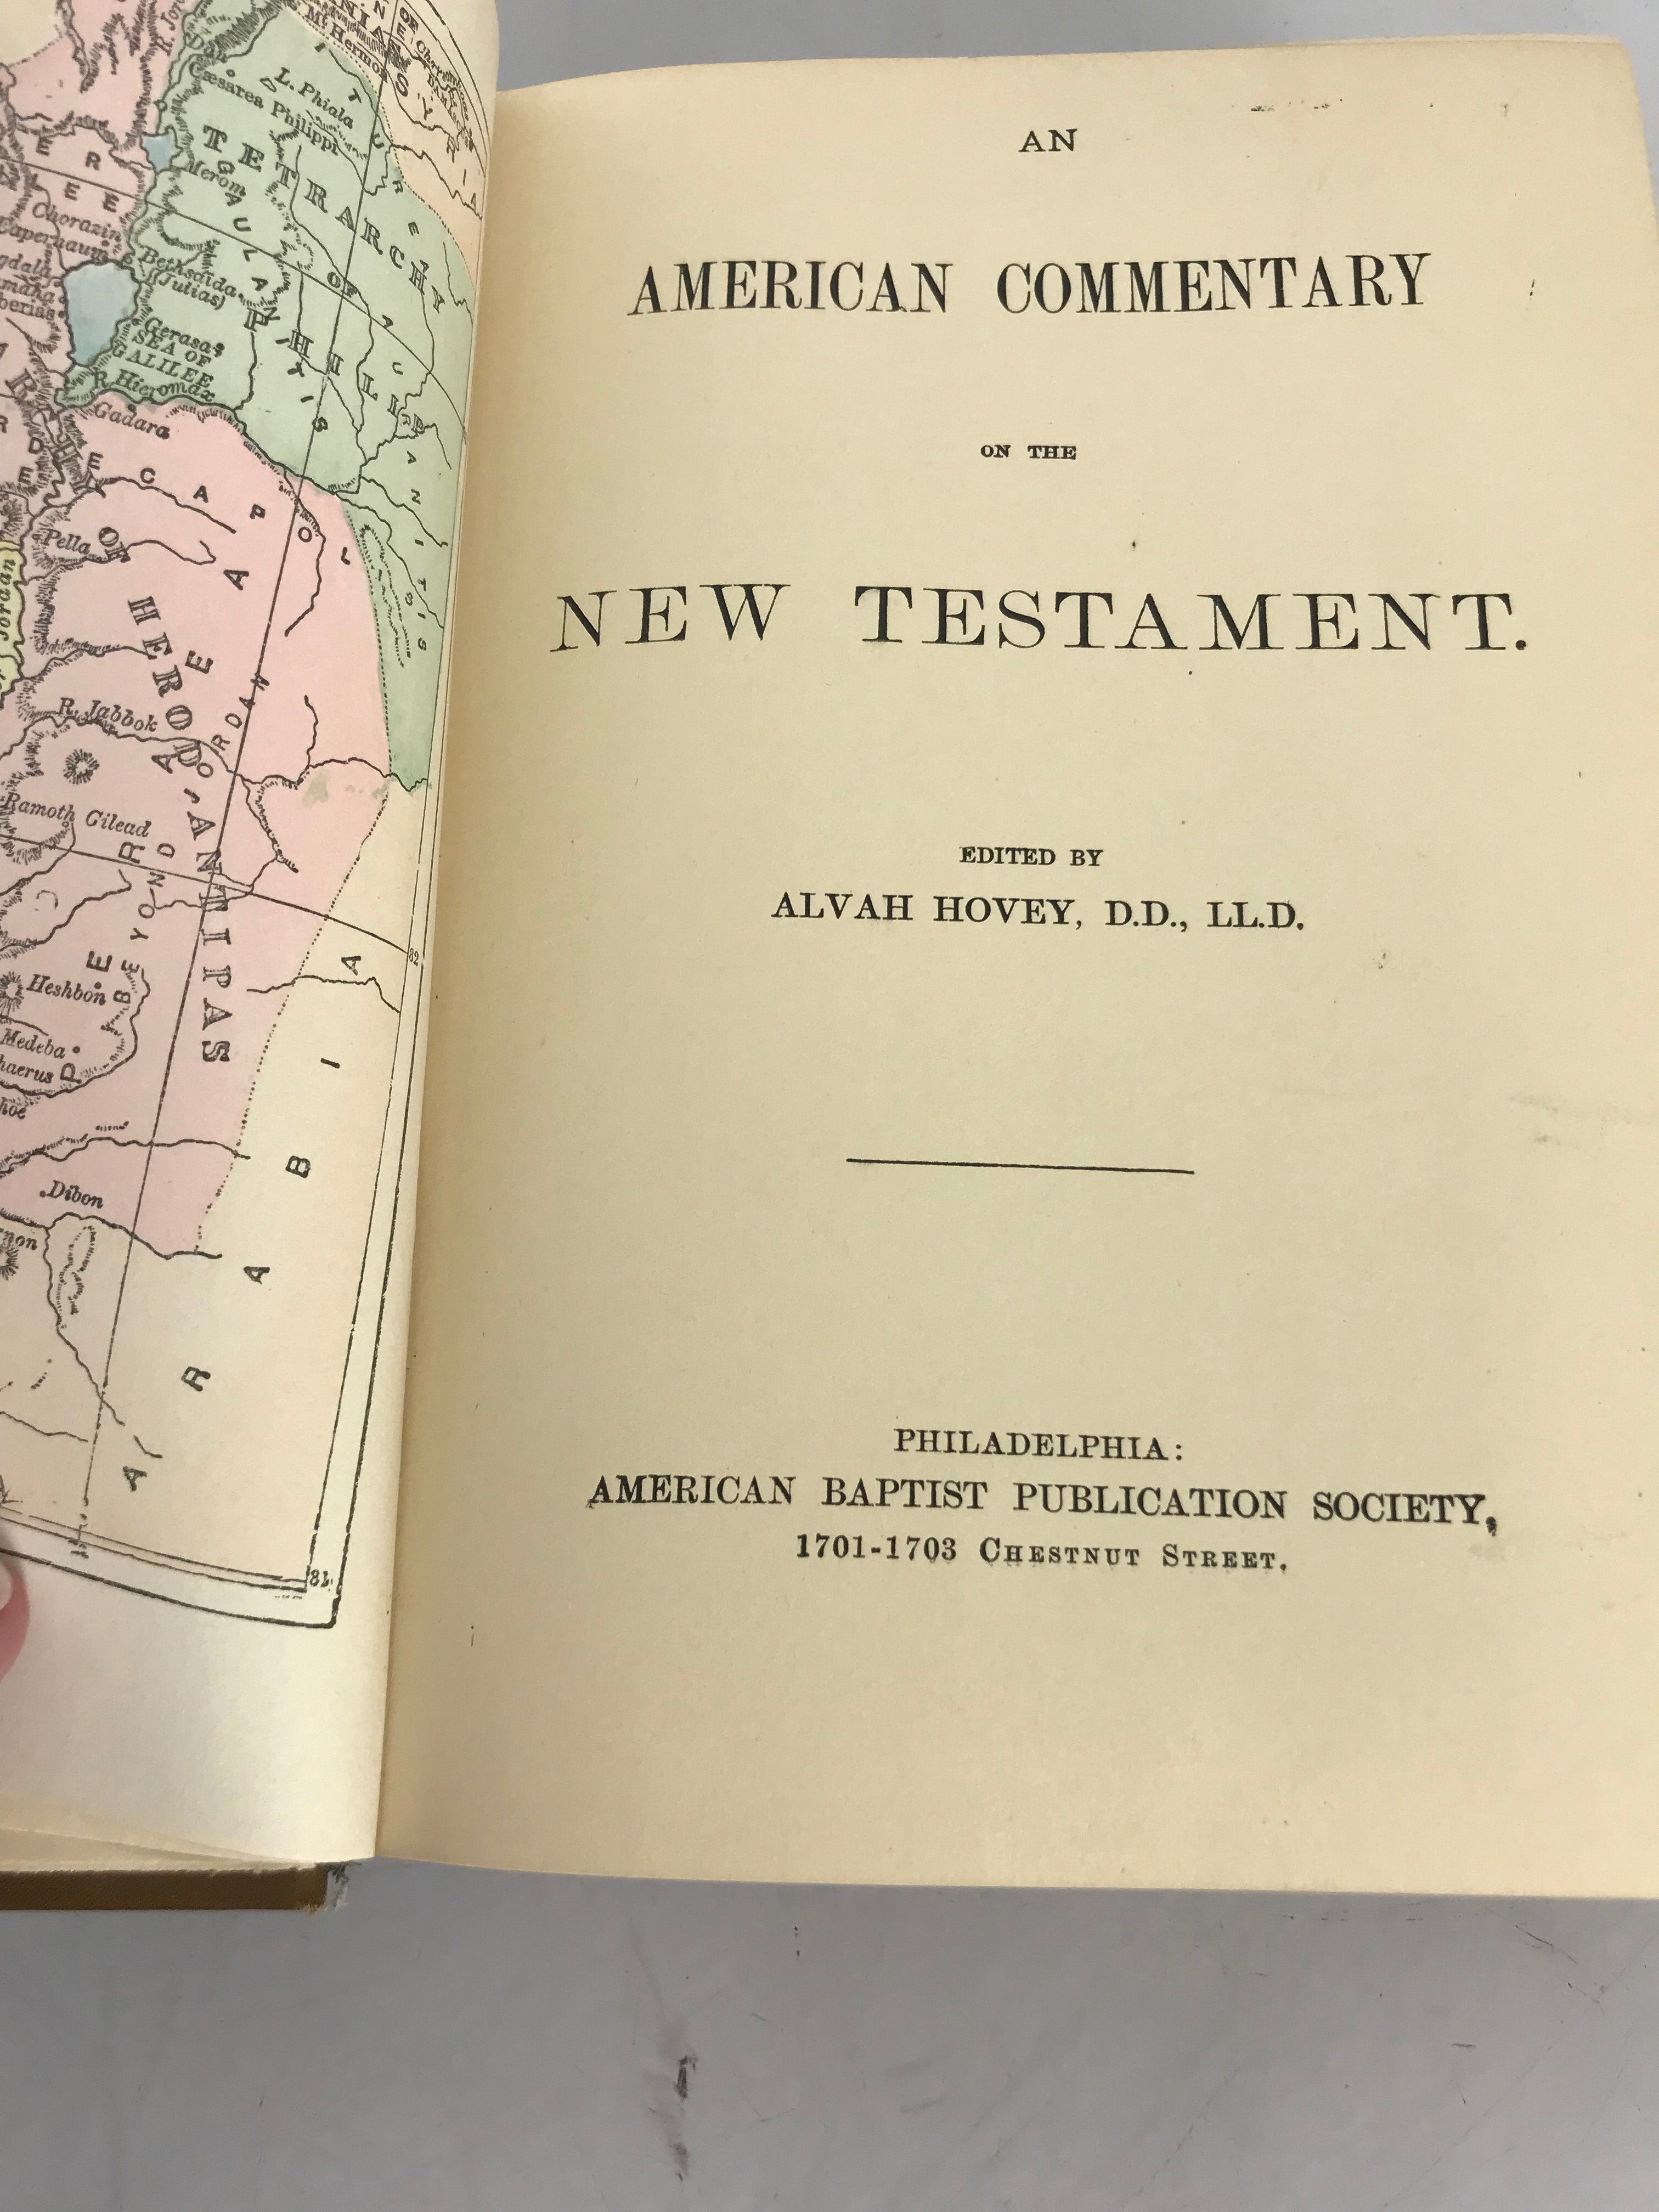 An American Commentary on the New Testament: Matthew by John Broadus 1886 HC